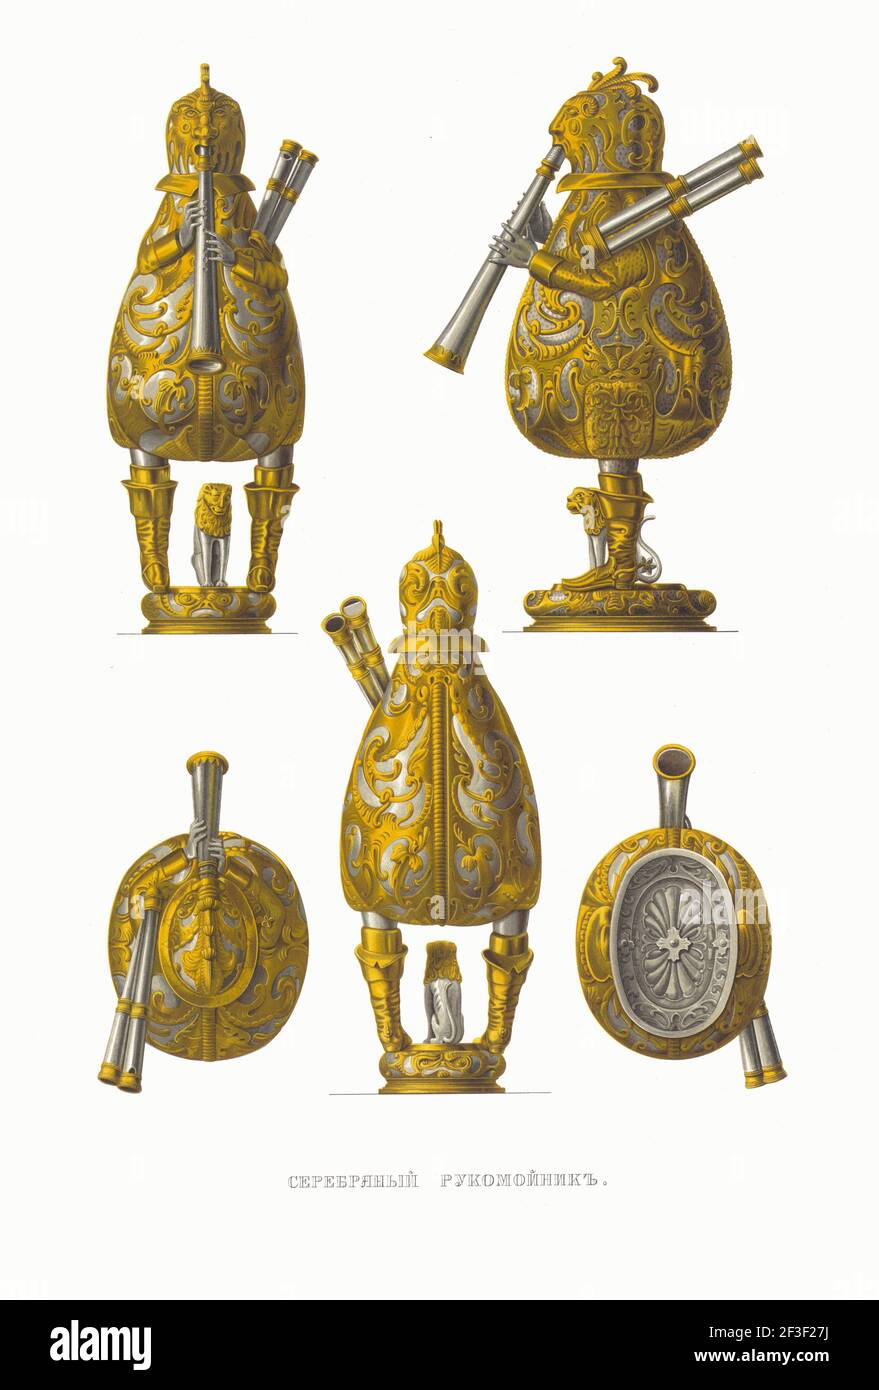 Silver Lavabo. From the Antiquities of the Russian State, 1849-1853. Private Collection. Stock Photo